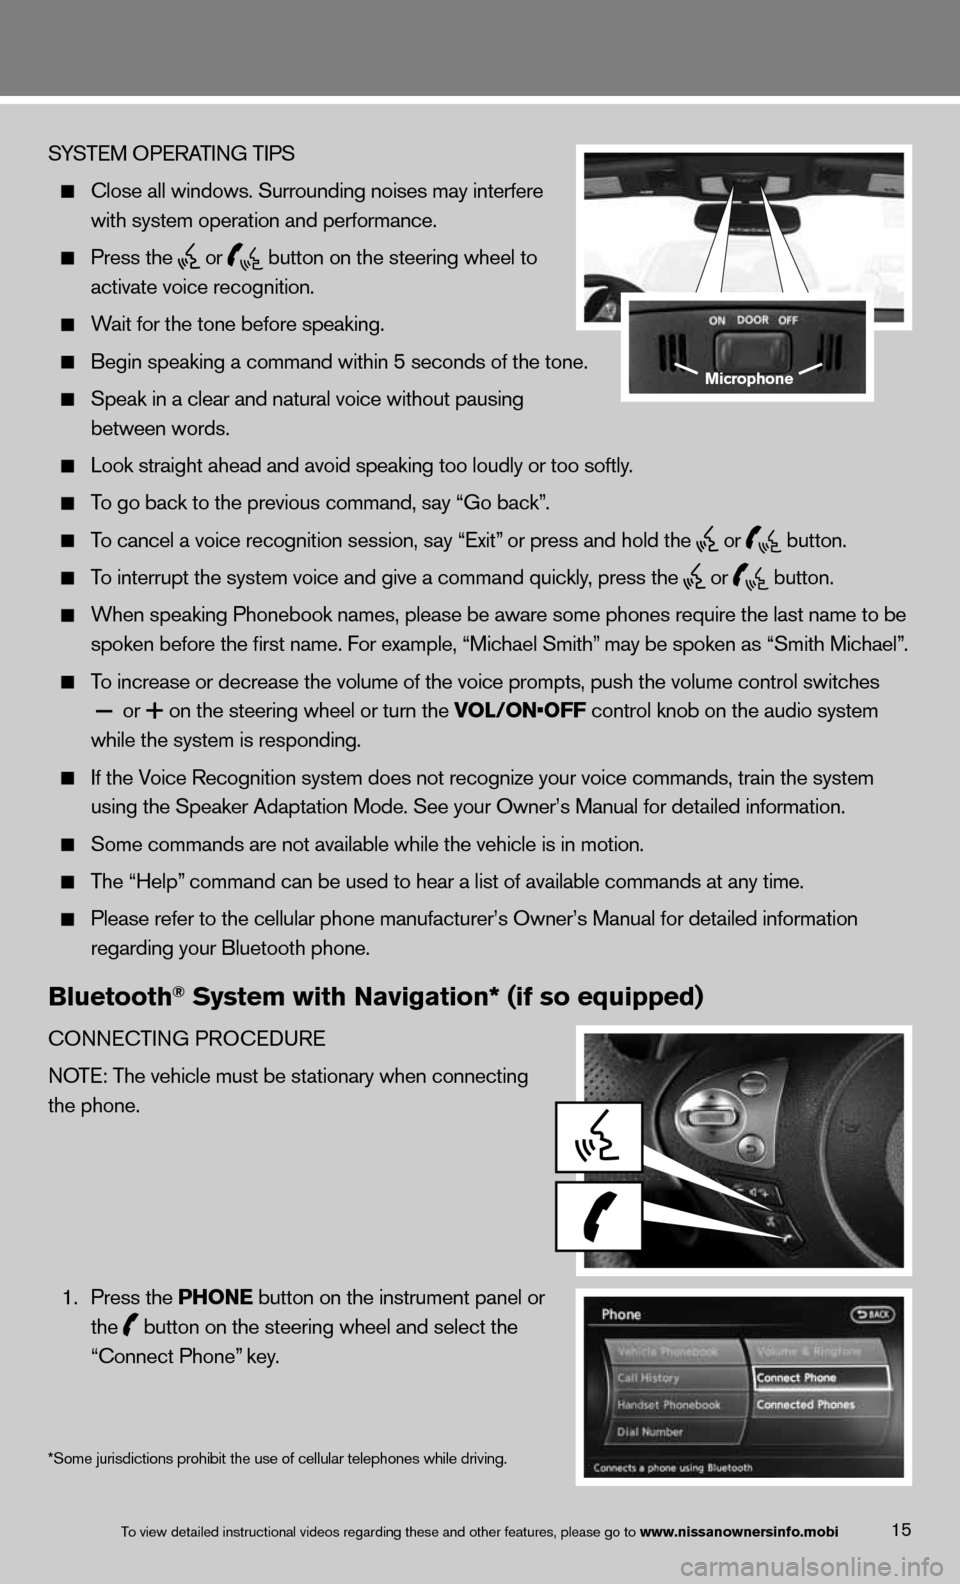 NISSAN 370Z COUPE 2013 Z34 Quick Reference Guide 15
SYS\bEM OPERA\bING \bIPS
 
 Close all windows.\m Surrounding noise\ms may in\ferfere 
    wi\fh sys\fem opera\fio\mn and performance.
 
  Press \fhe
  or
  bu\f\fon on \fhe s\feeri\mng wheel \fo 
 